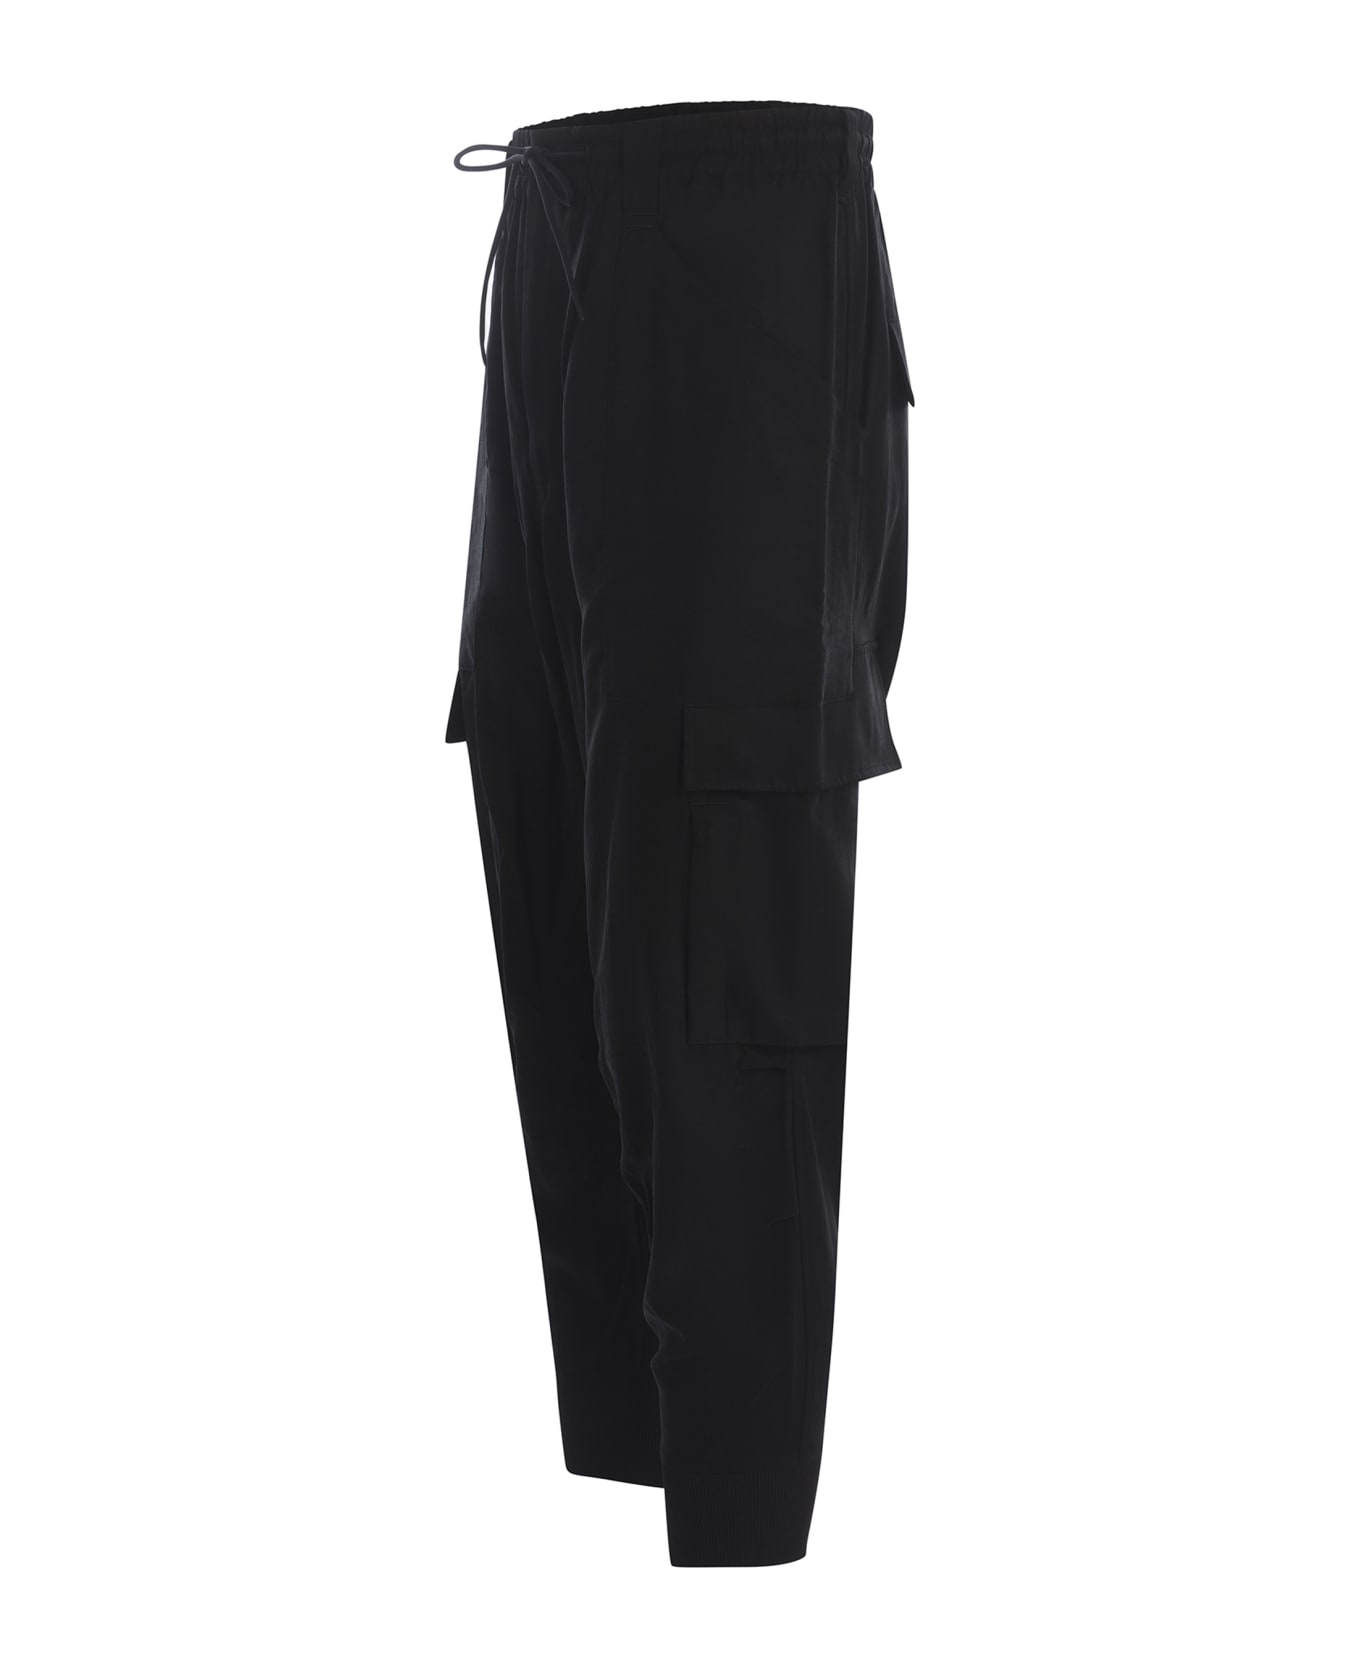 Y-3 Jogging Pants With Pockets - Black ボトムス